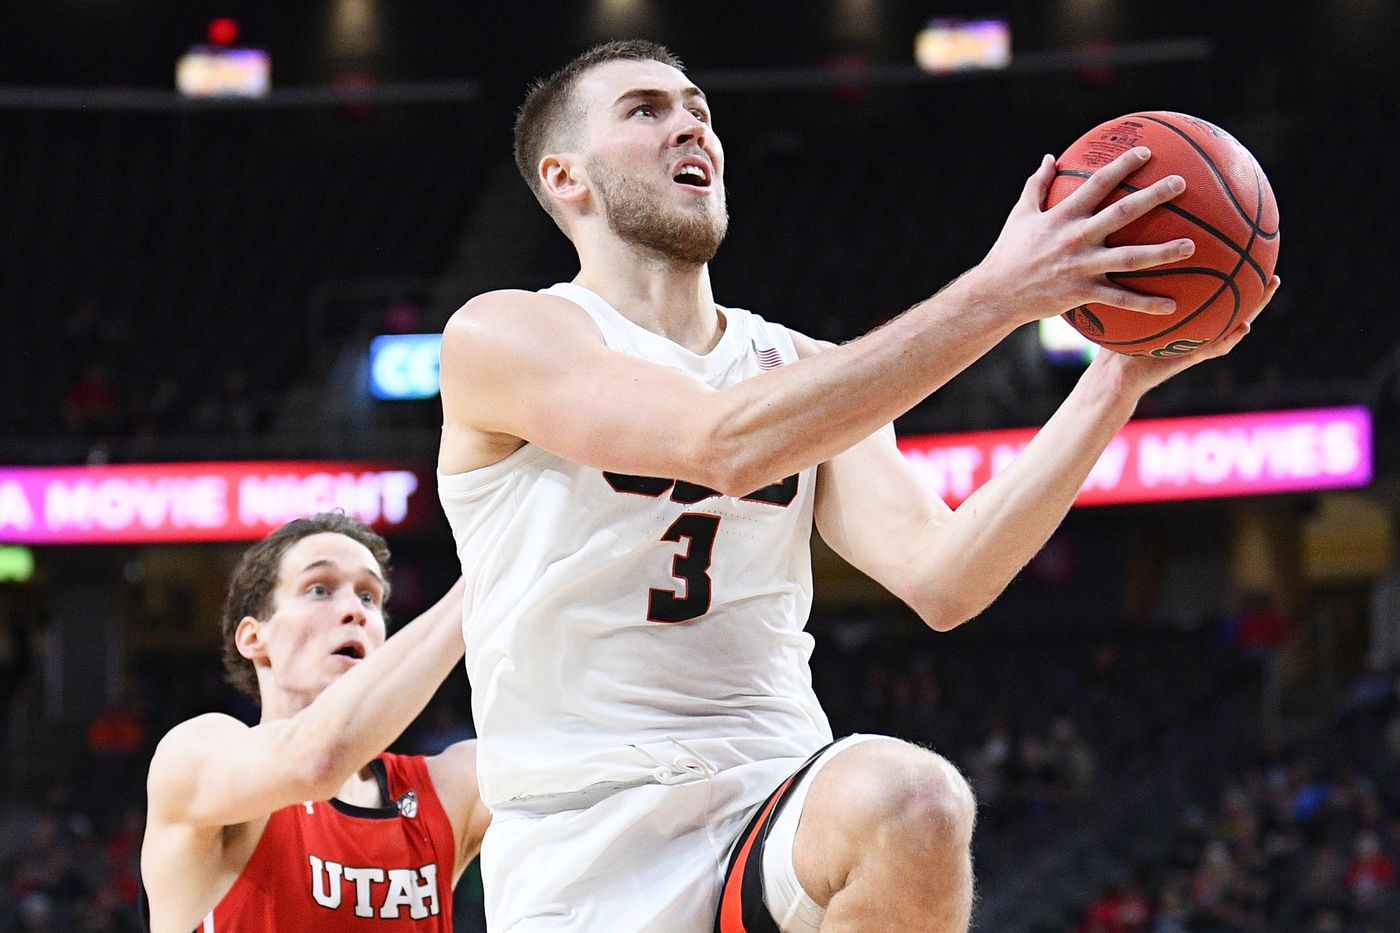 21 NBA Draft scouting report: Tres Tinkle - Peachtree Hoops Regarding Basketball Player Scouting Report Template